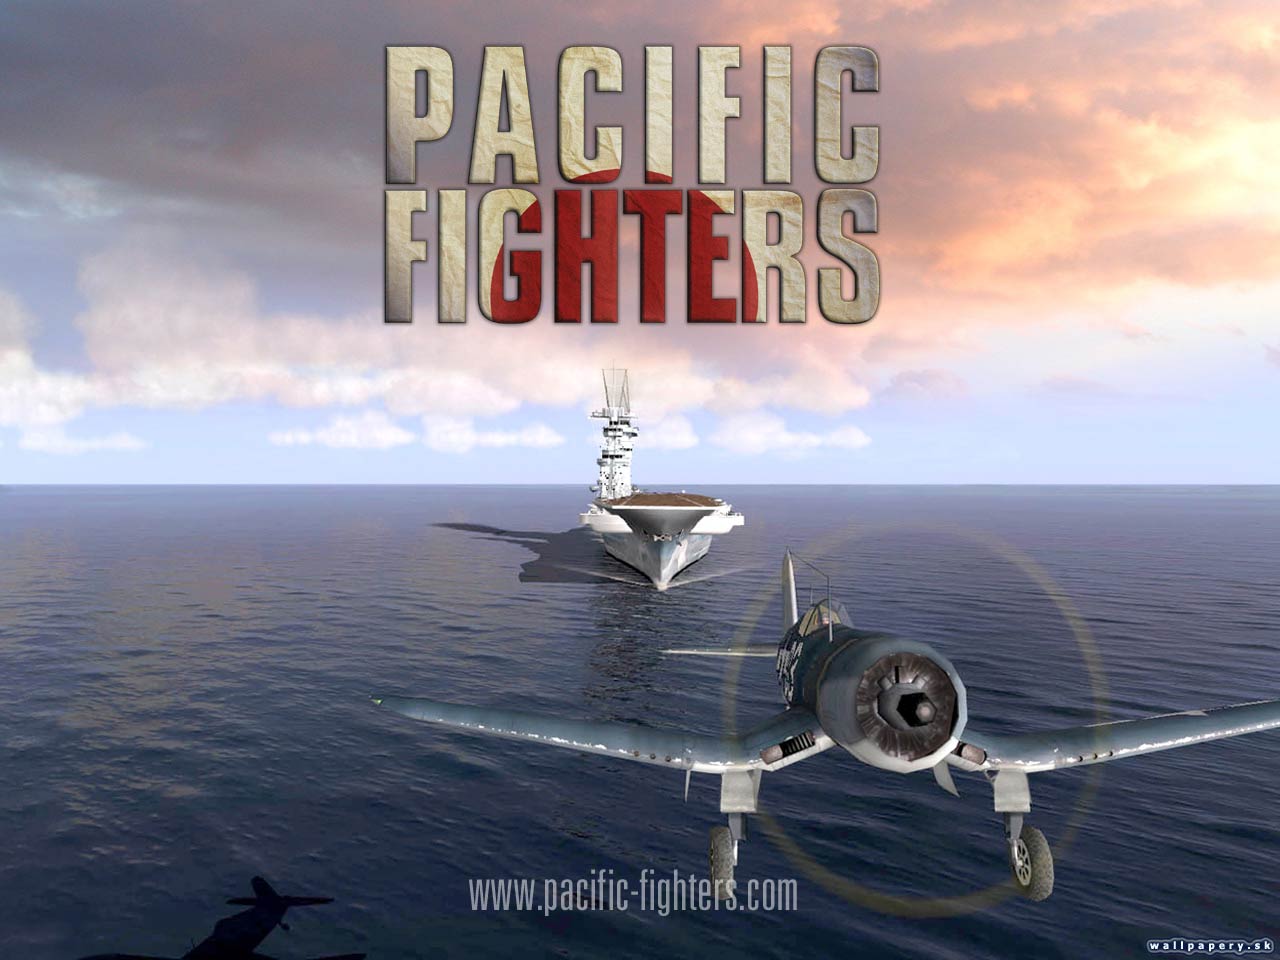 Pacific Fighters - wallpaper 1